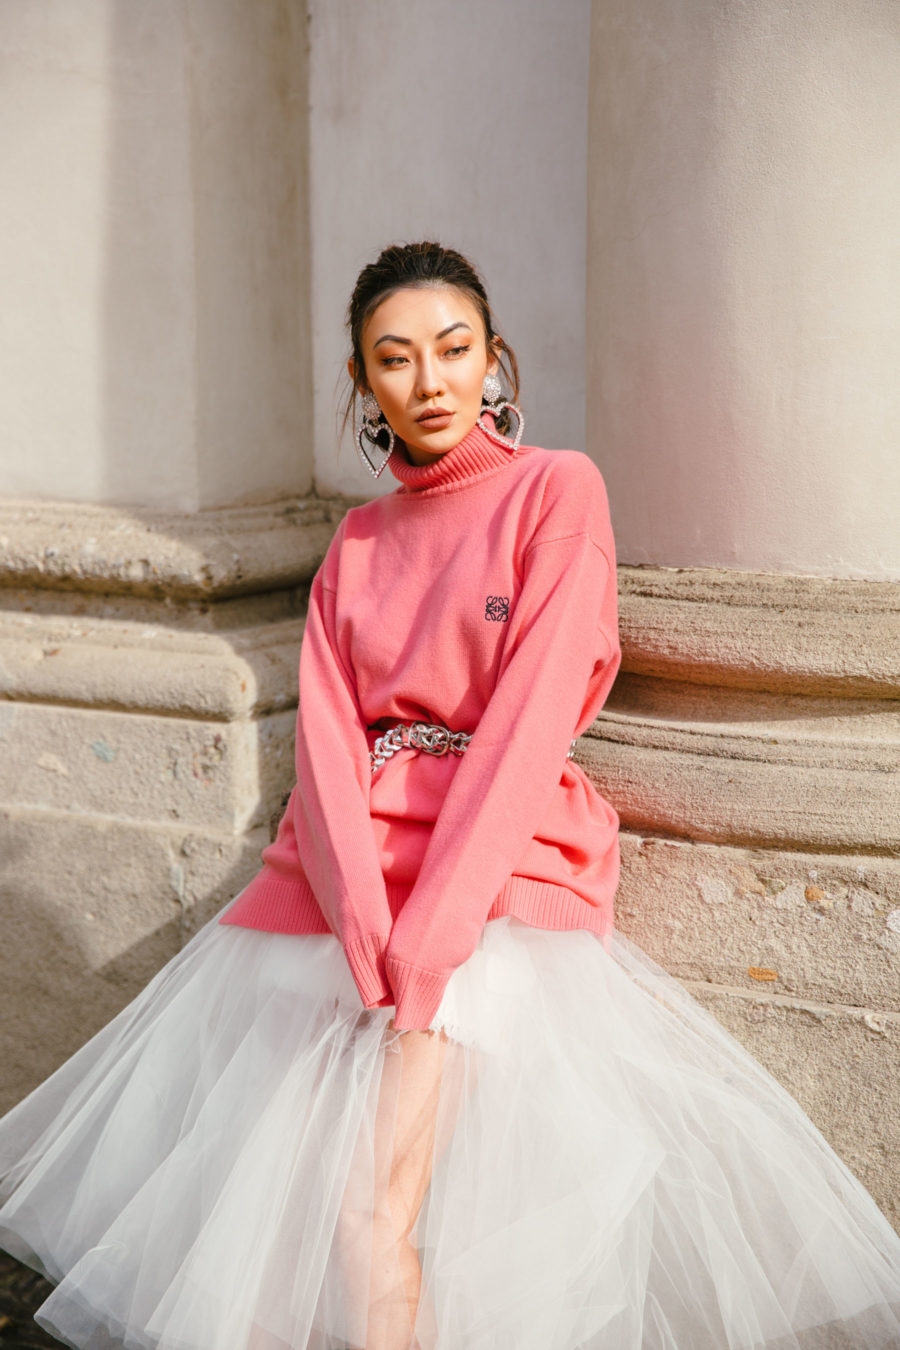 cute thanksgiving outfits by jessica wang - tulle skirt and sweater // Jessica Wang - Notjessfashion.com